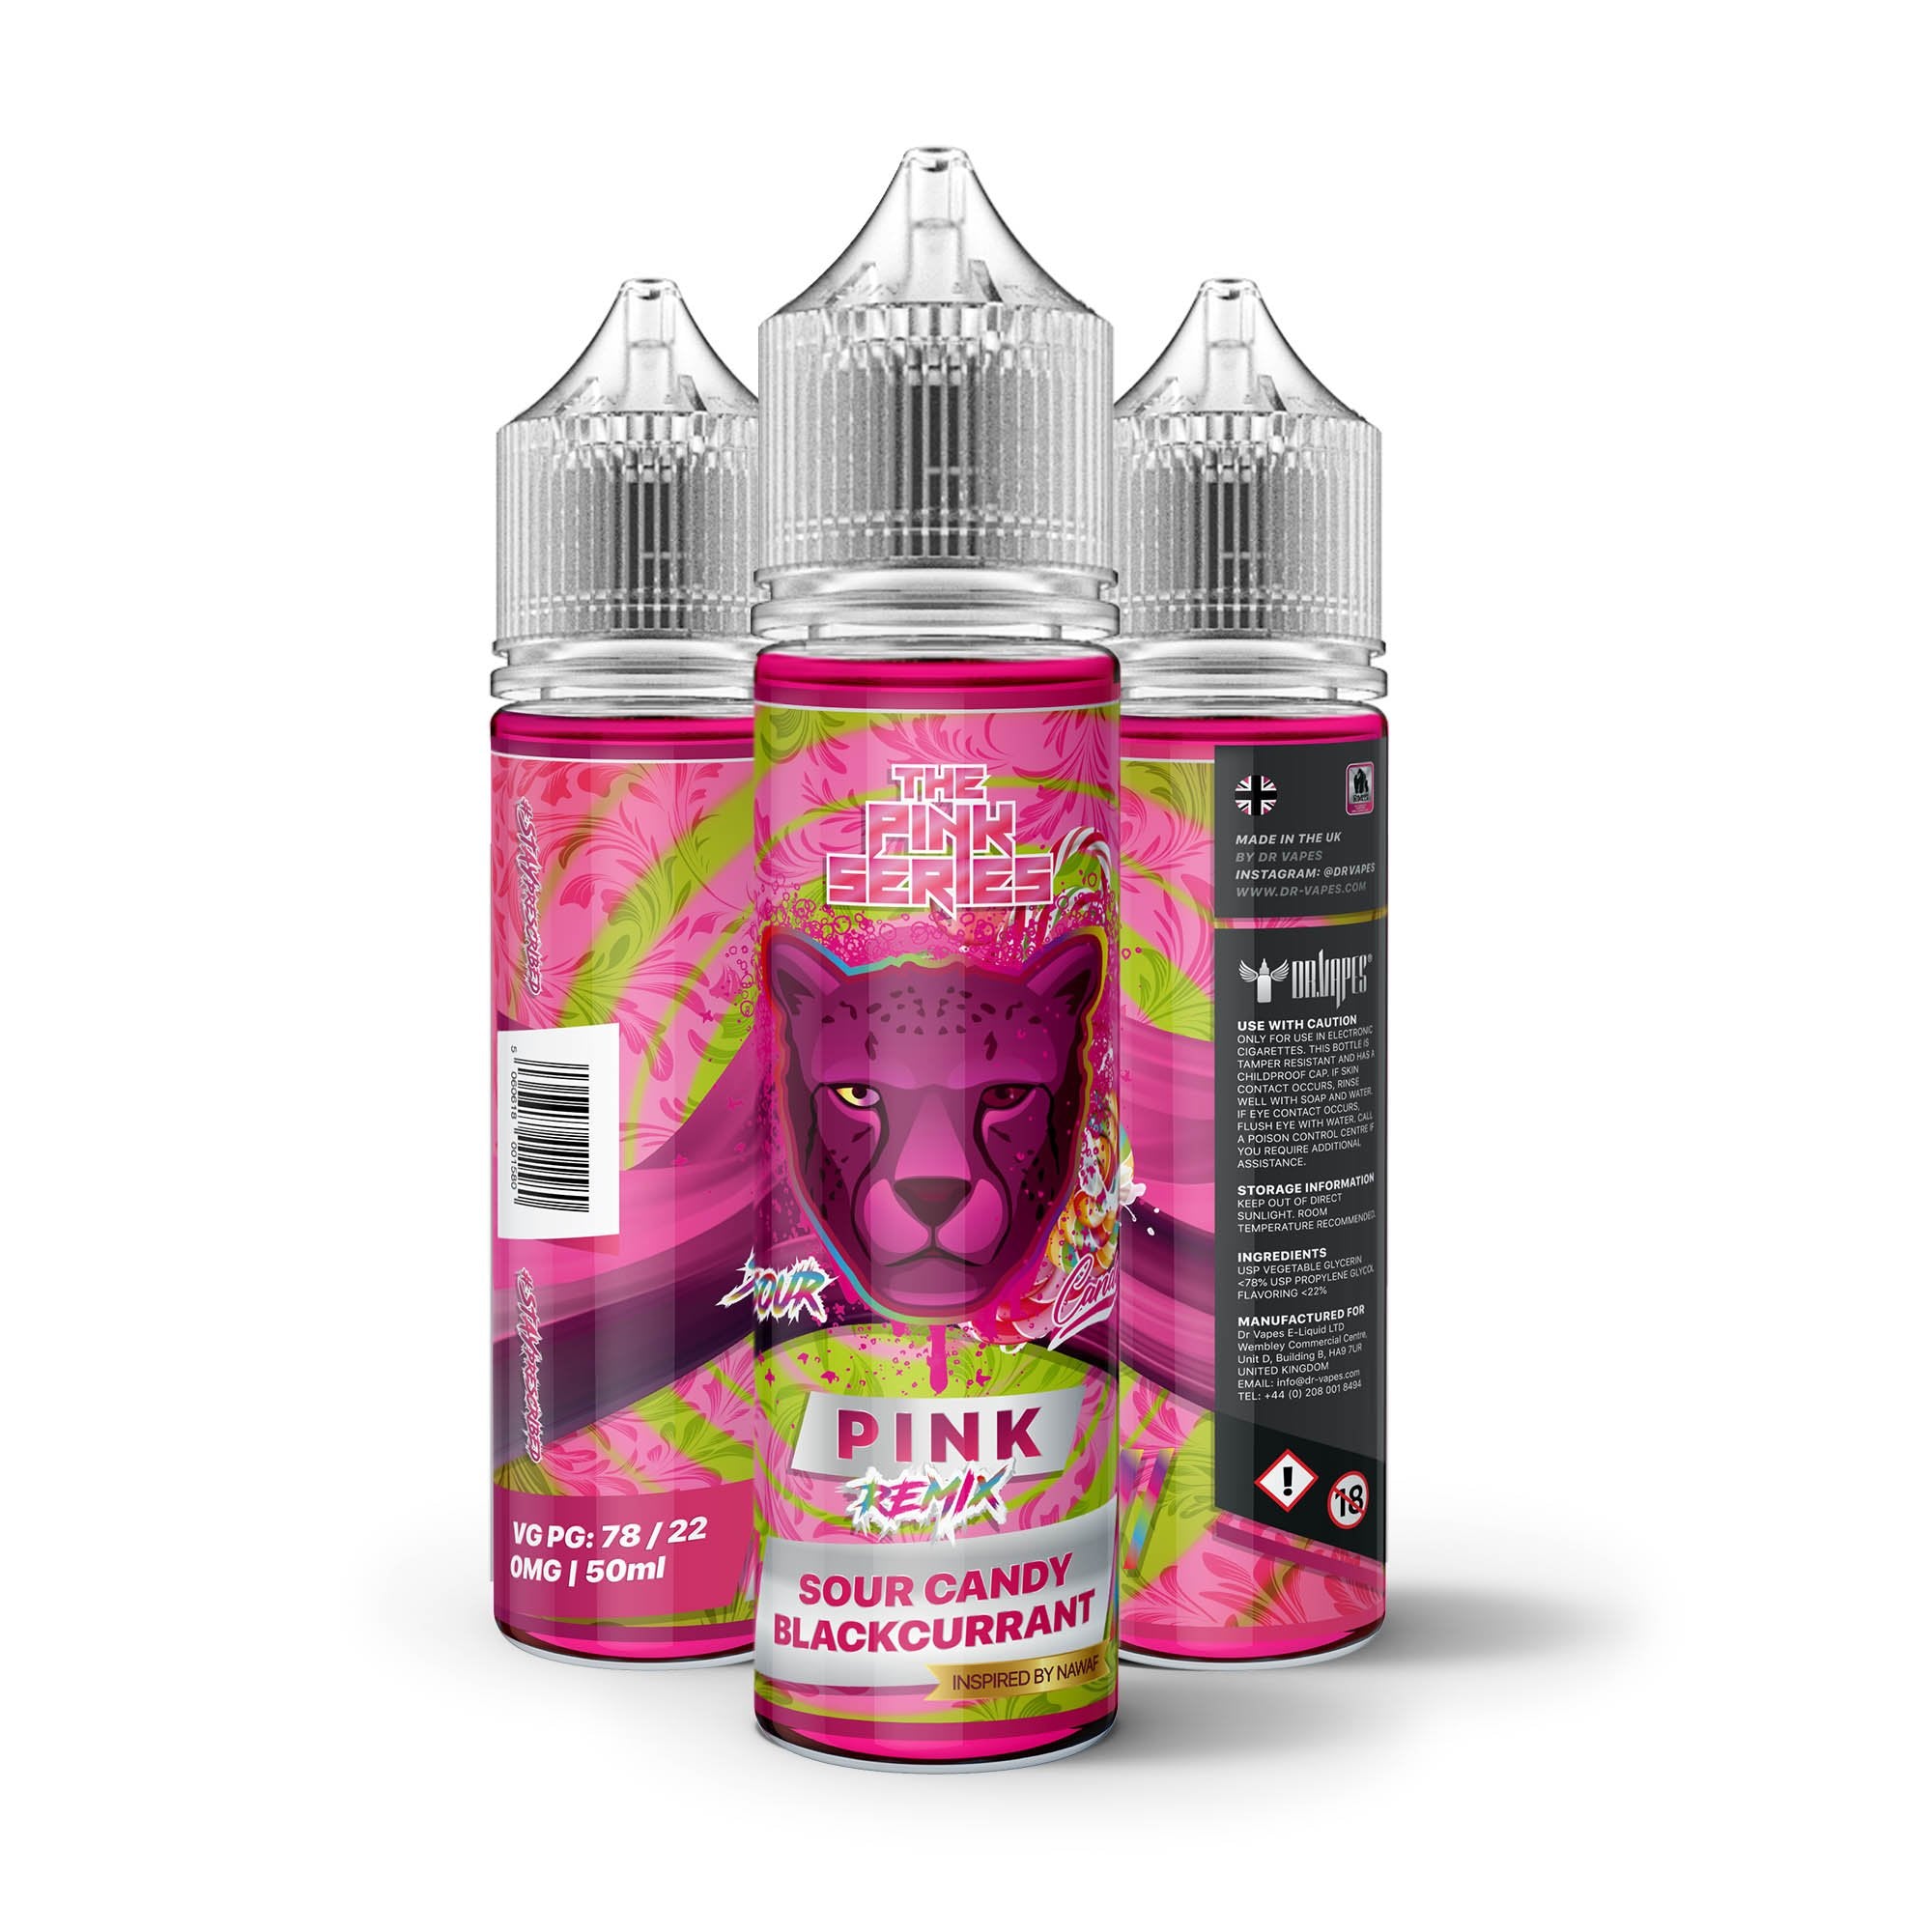 The Panther Series Pink Remix by DR. VAPES - Vape Station